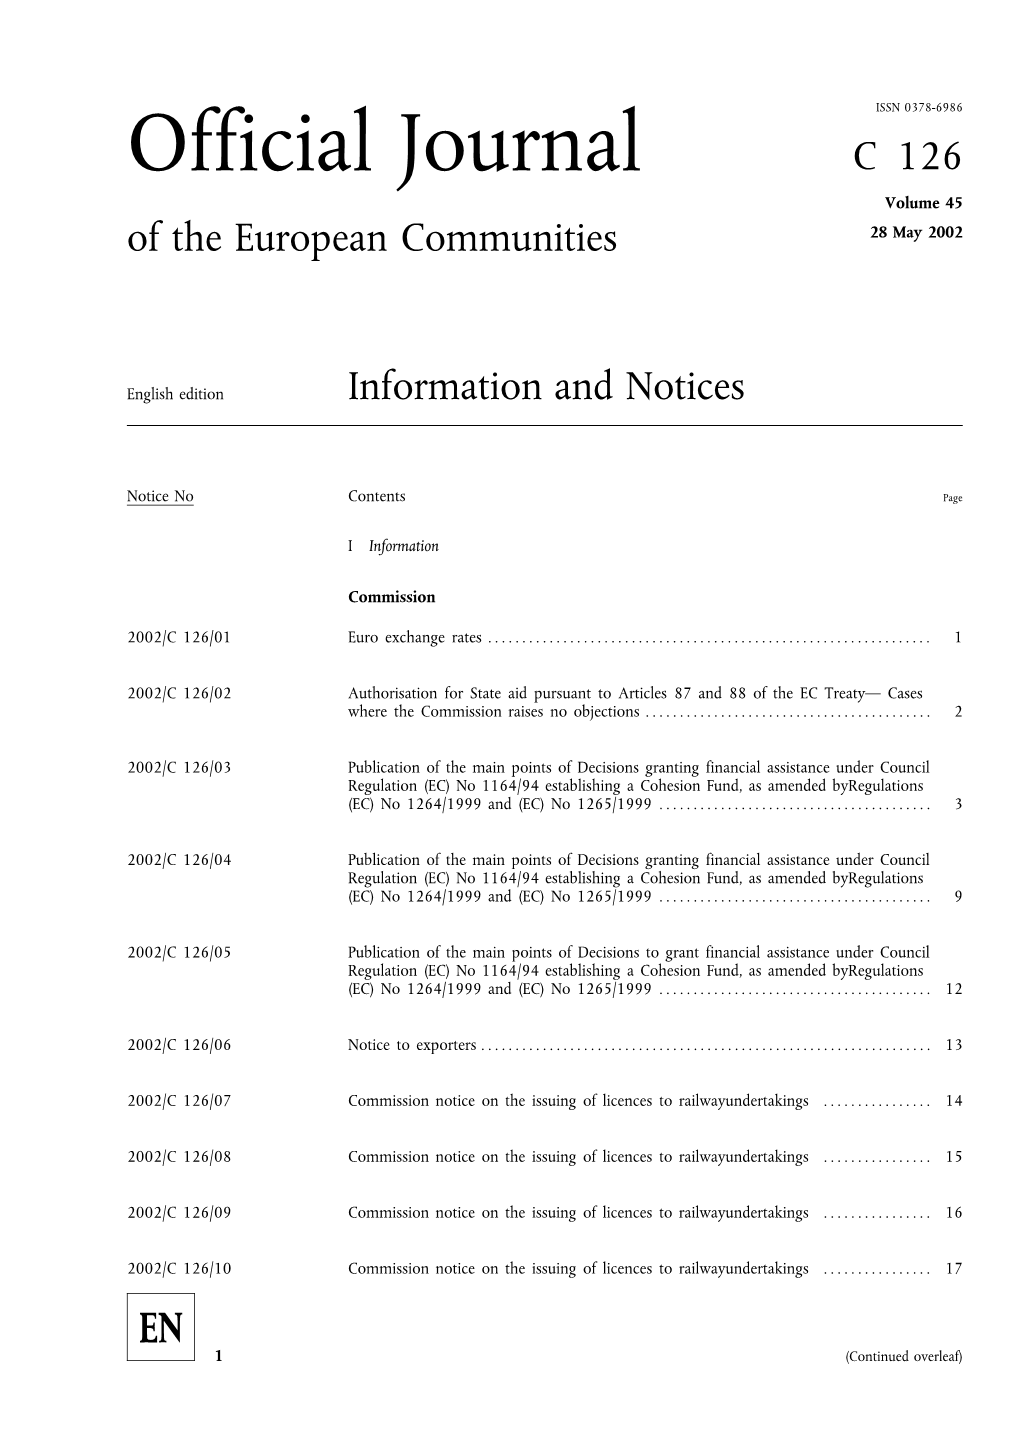 Official Journal C 126 Volume 45 of the European Communities 28 May 2002